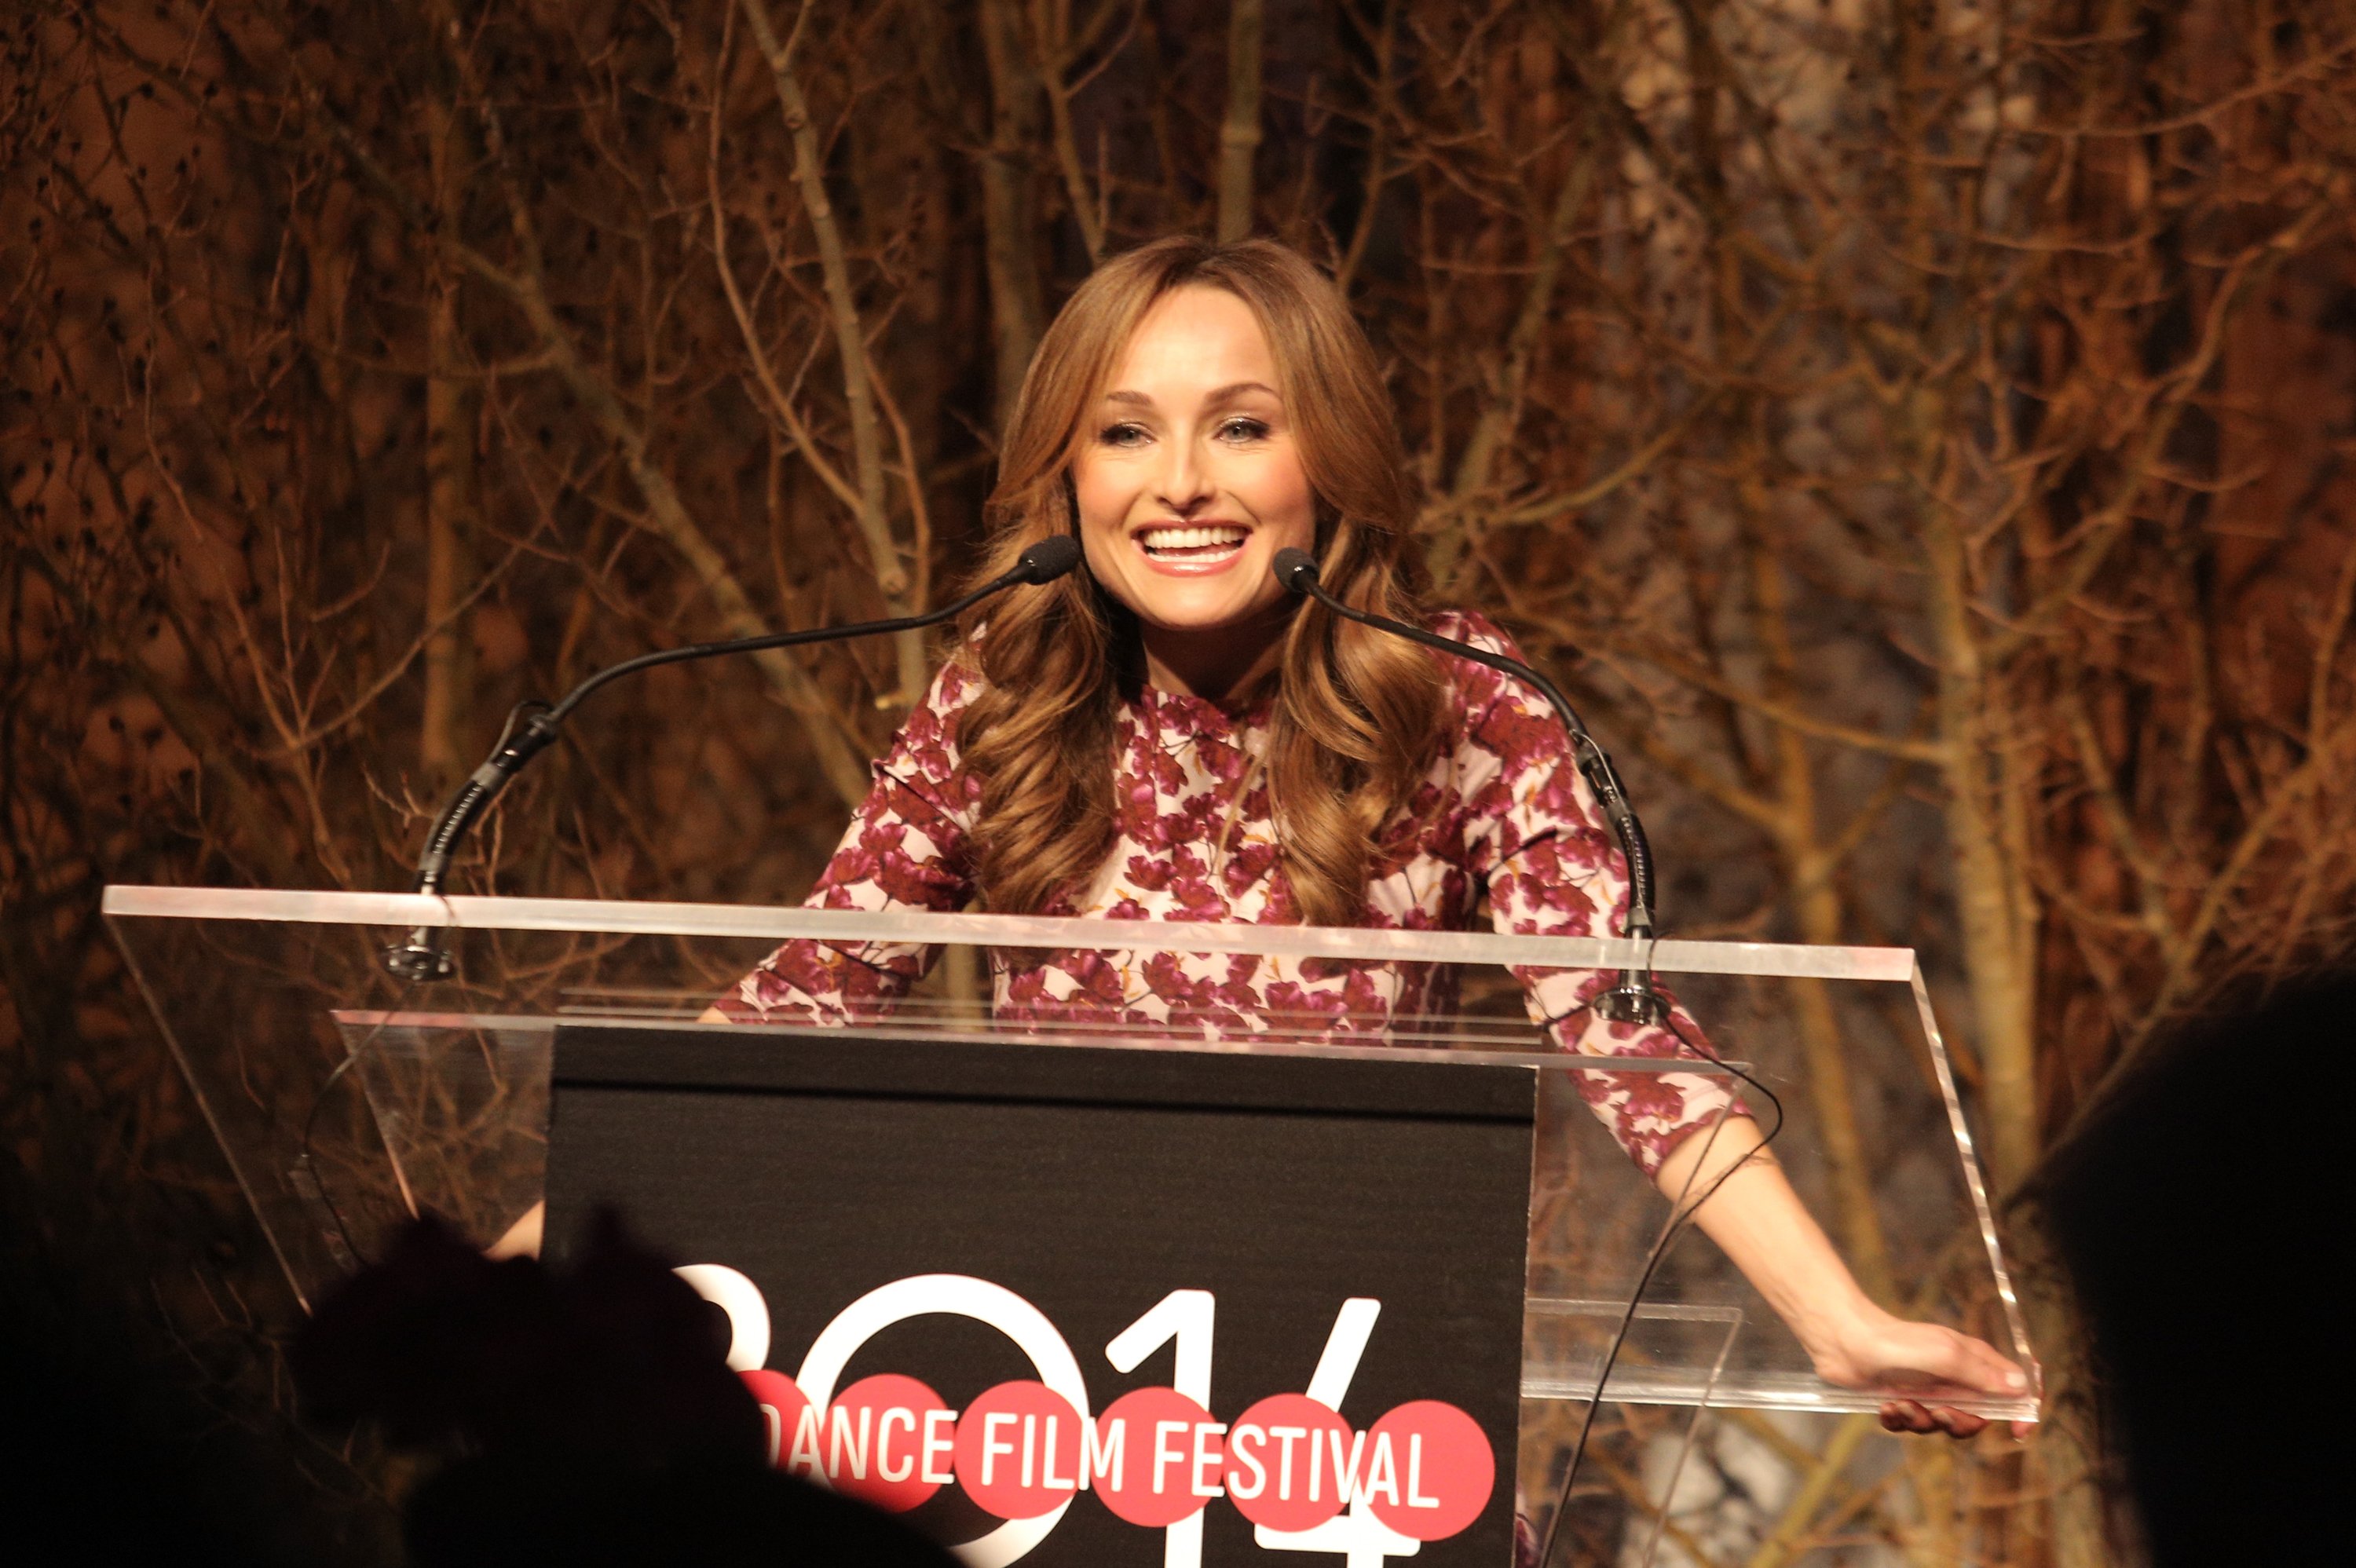 Food Network personality Giada De Laurentiis speaks at a lectern in this photograph.